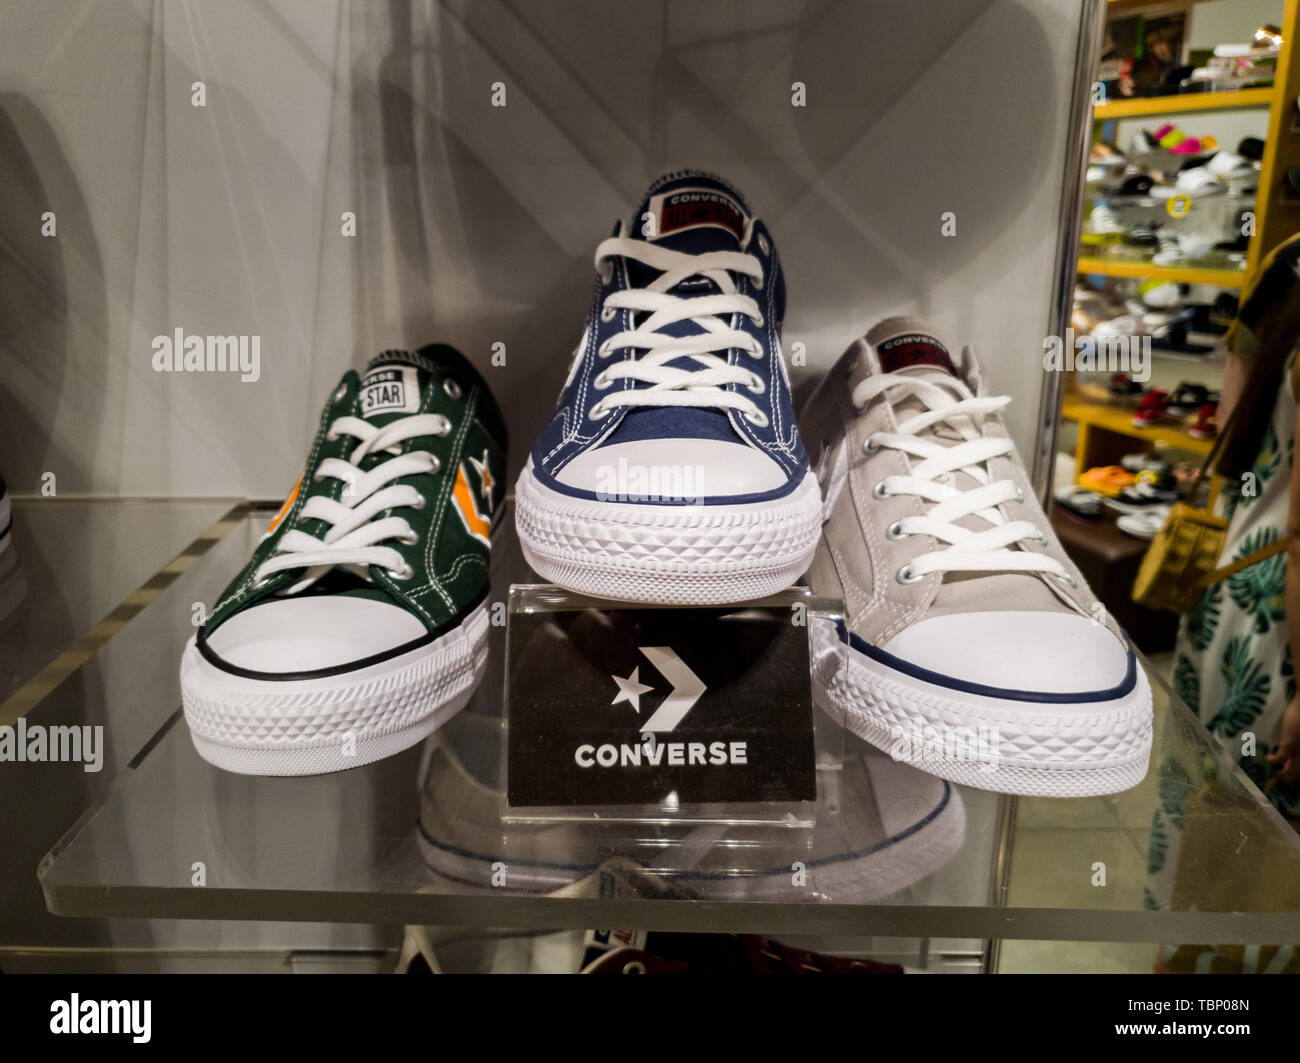 SHEFFIELD, UK - 2ND JUNE 2019: Mens Converse trainers on display for sale in a store in the UK Stock Photo